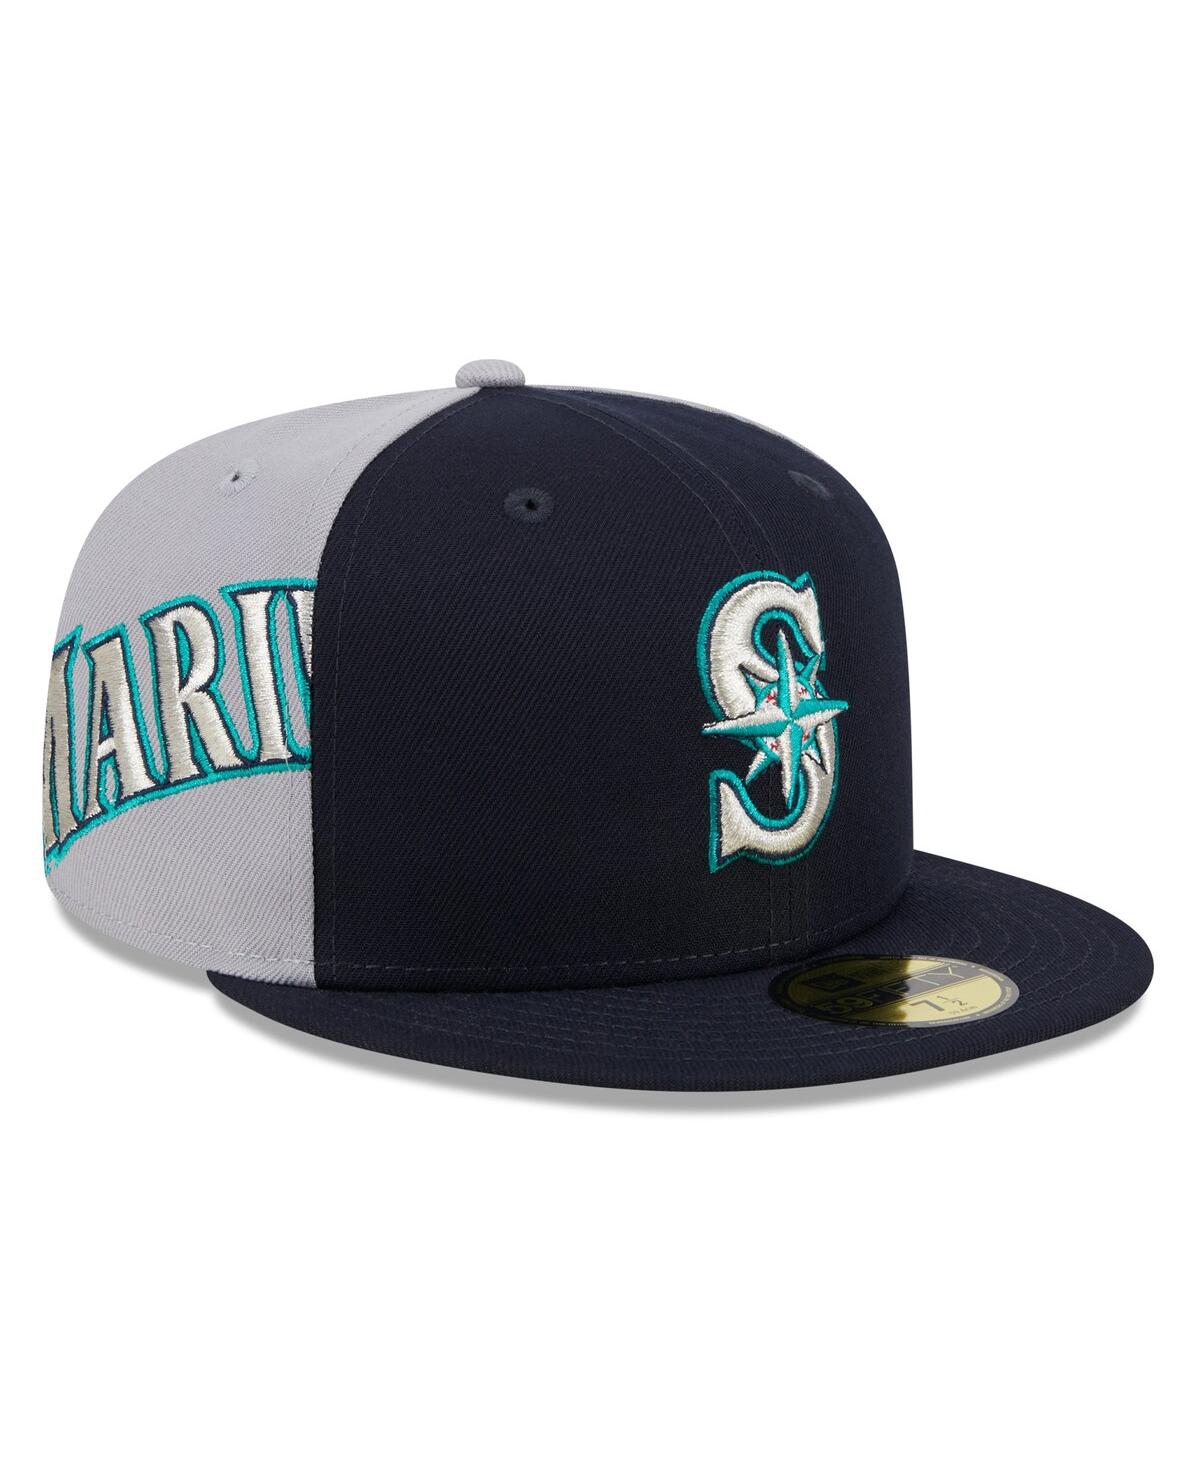 Men's Navy/Gray Seattle Mariners Gameday Sideswipe 59Fifty Fitted Hat - Navy Gray